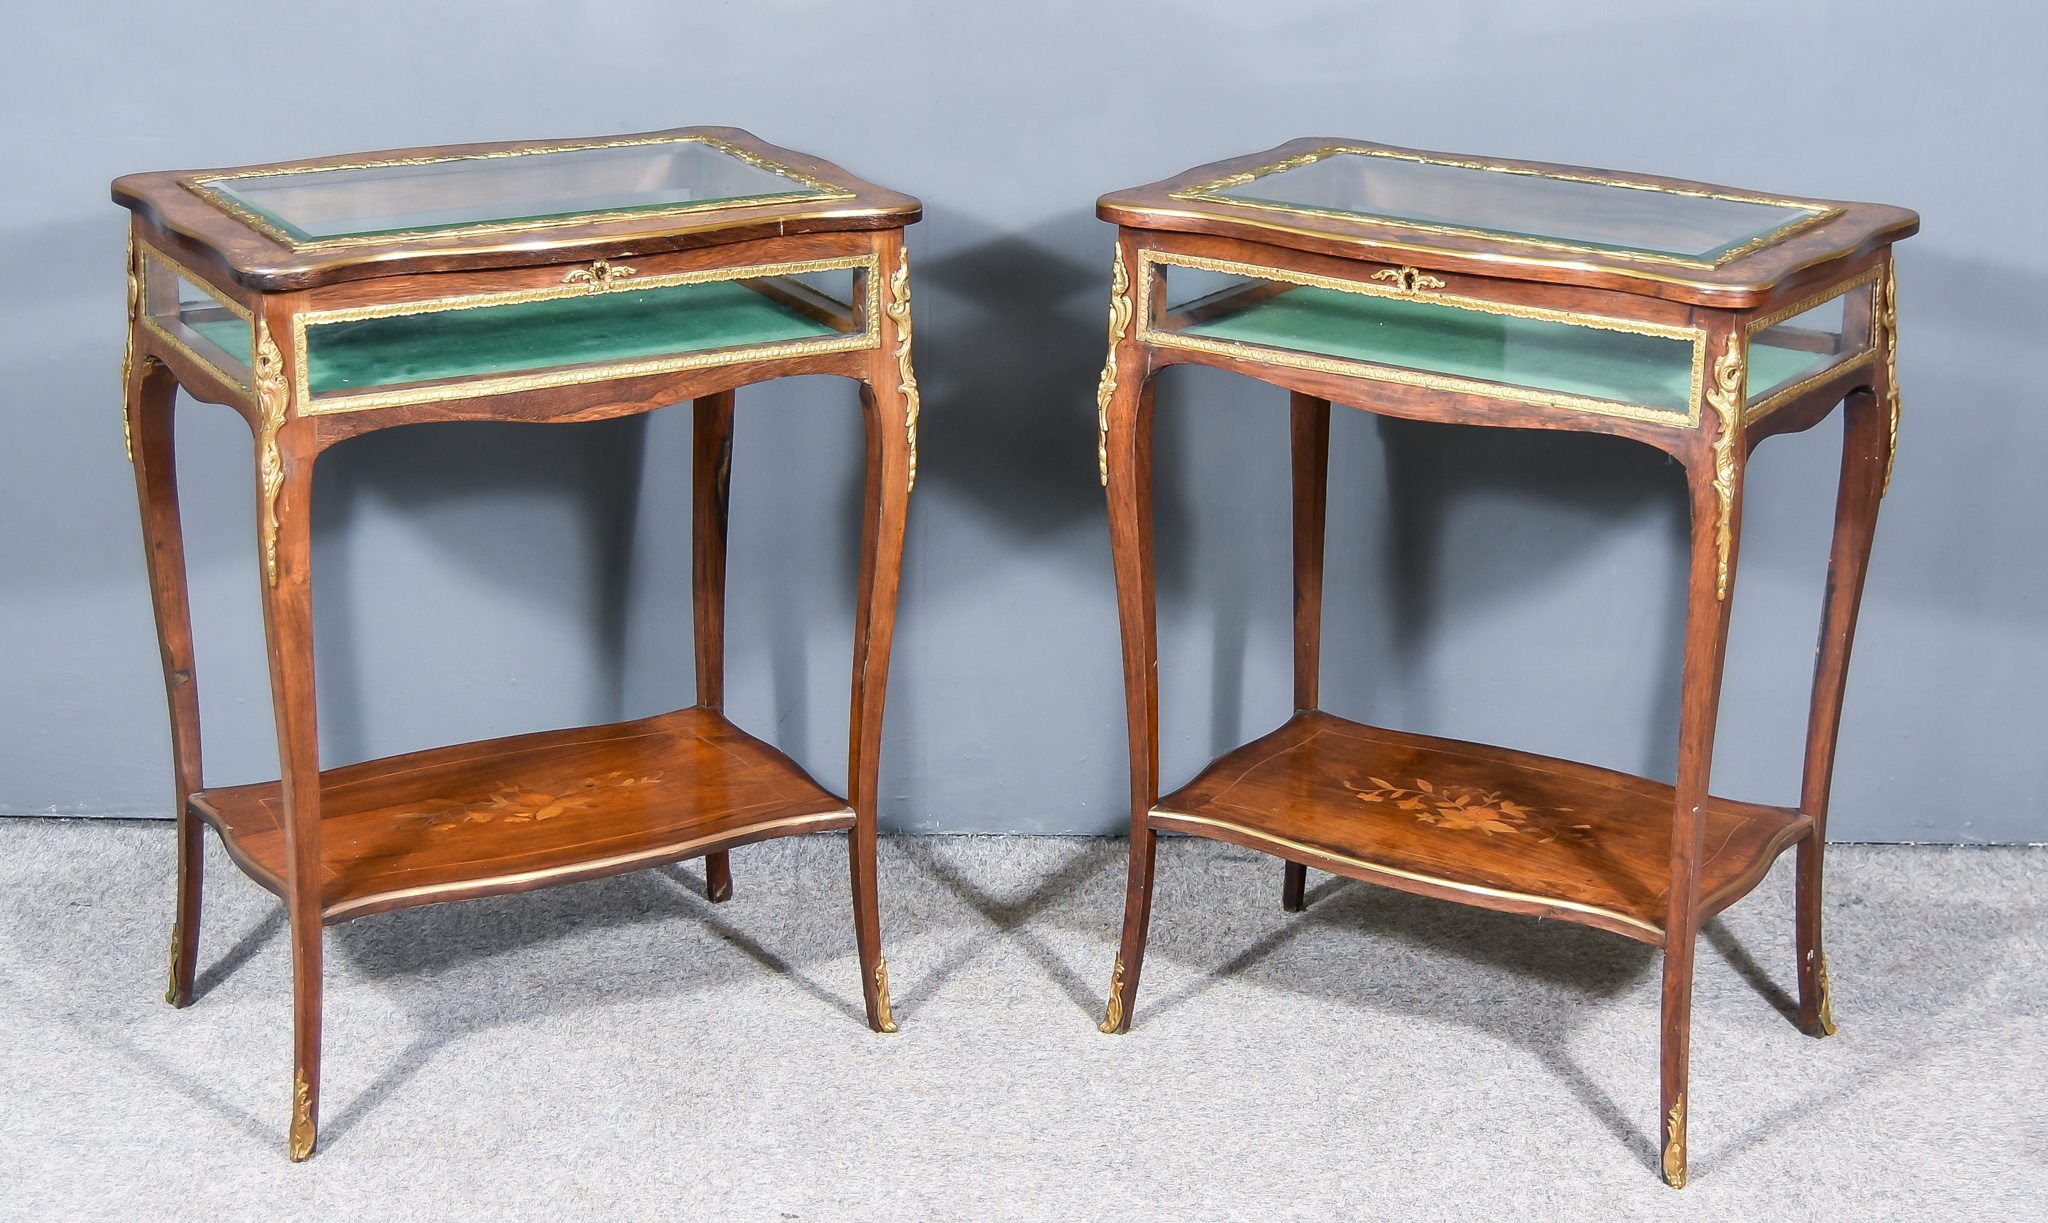 A Pair of Late 19th/Early 20th Century French Rosewood Marquetry and Gilt Metal Mounted